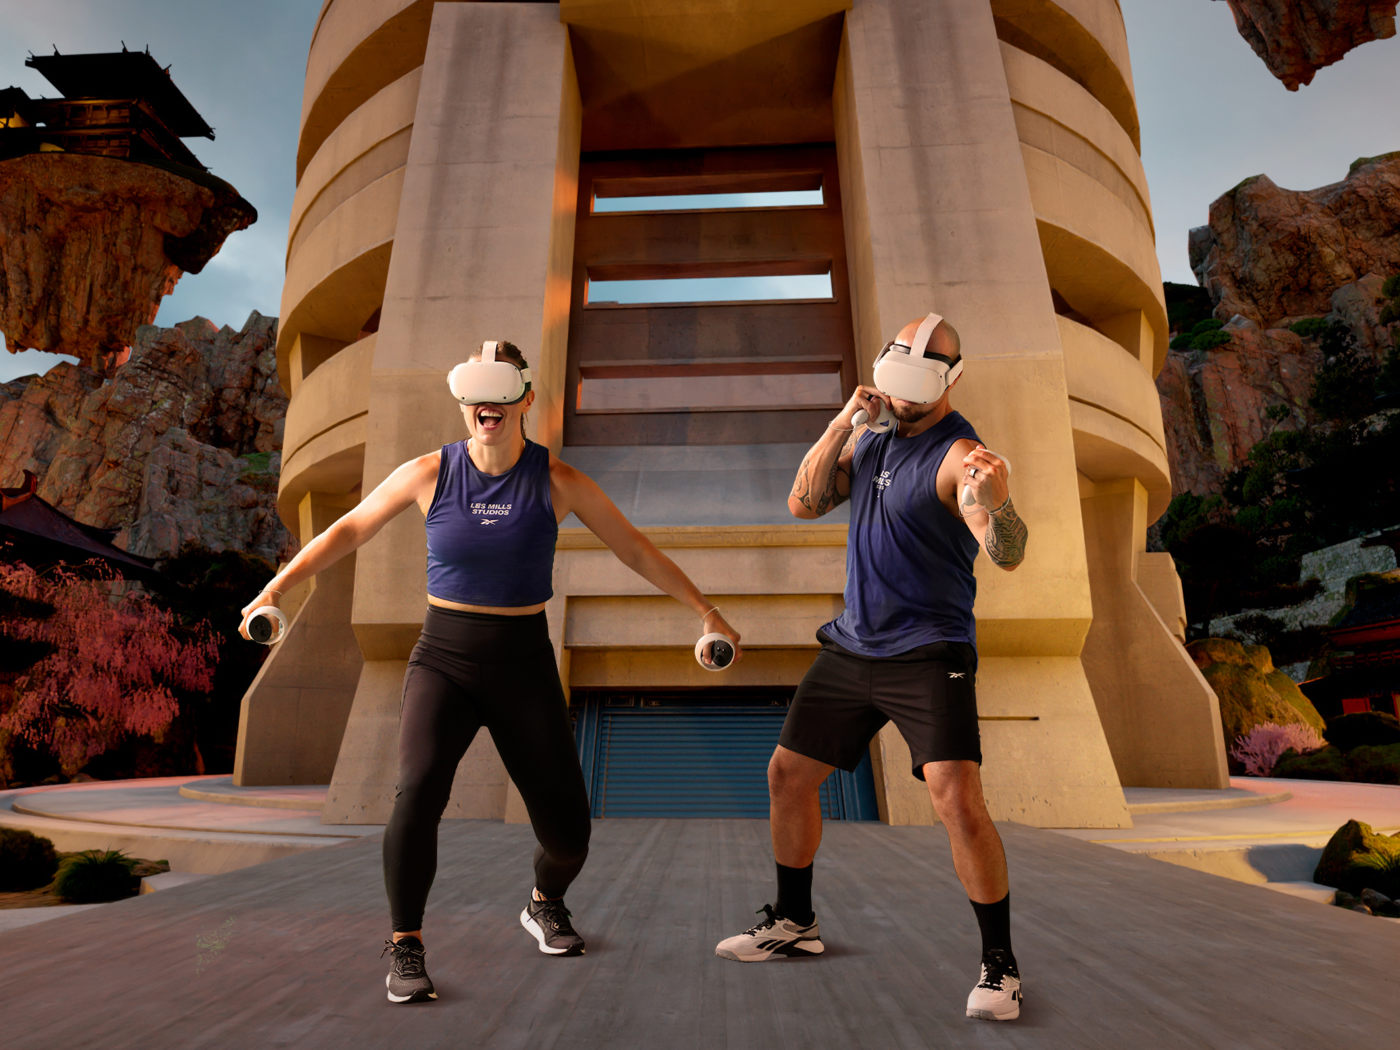 Your Ultimate Guide to Les Mills XR Bodycombat